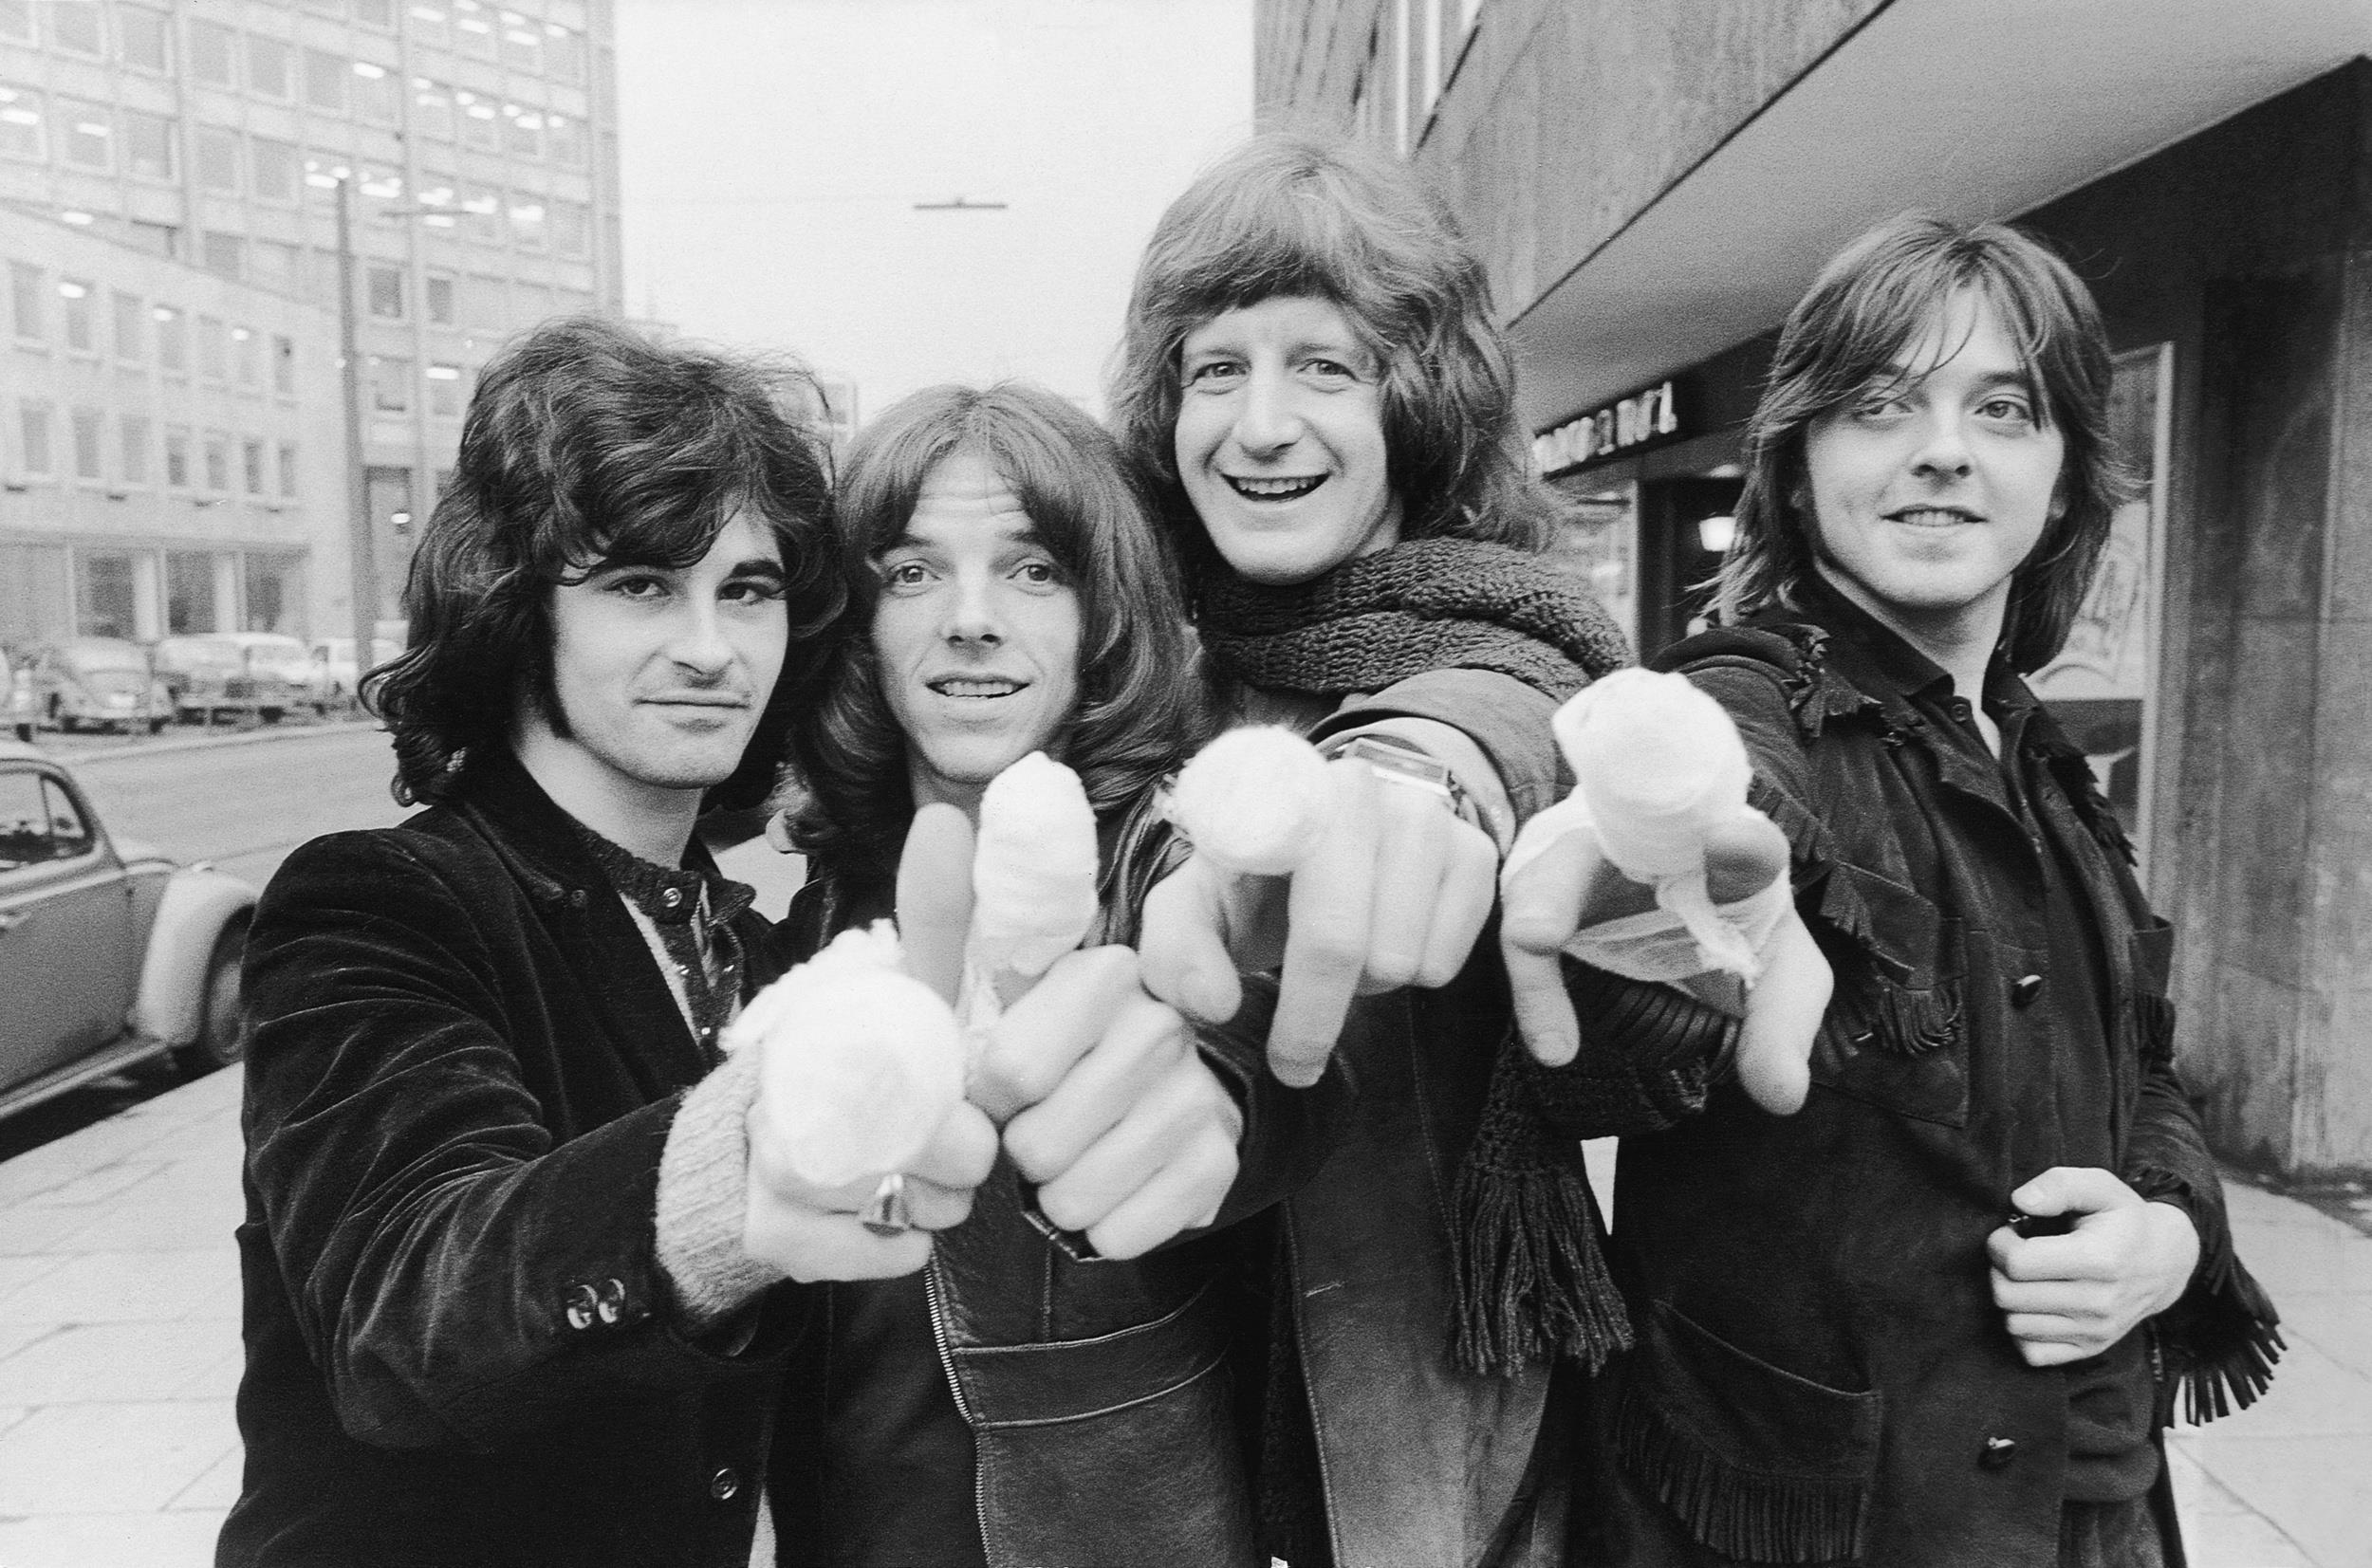 <p>In the case of Badfinger, it's about "what could have been." Dubbed by some critics in the mid-1960s as the "next Beatles," these Welsh power-poppers were the first band signed by the Fab Four's Apple label in 1968. Though the group enjoyed worldwide success with hits "Come and Get It," "No Matter What," "Day After Day<span>" and "</span><a href="https://www.youtube.com/watch?v=TkA7xQb6uPk"><span>Baby Blue,<span>"</span></span></a><span><span> financial and legal issues consistently plagued the band following Apple's demise. Vocalist Pete Ham tragically took his own life in 1975, as did guitarist/bassist Tom Evans in '83. Drummer Mike Gibbins died of a brain aneurysm in 2005, leaving guitarist Joey Molland as the only surviving member from the classic lineup. Molland, however, has toured under the Badfinger name in recent years.</span></span></p><p><a href='https://www.msn.com/en-us/community/channel/vid-cj9pqbr0vn9in2b6ddcd8sfgpfq6x6utp44fssrv6mc2gtybw0us'>Follow us on MSN to see more of our exclusive entertainment content.</a></p>